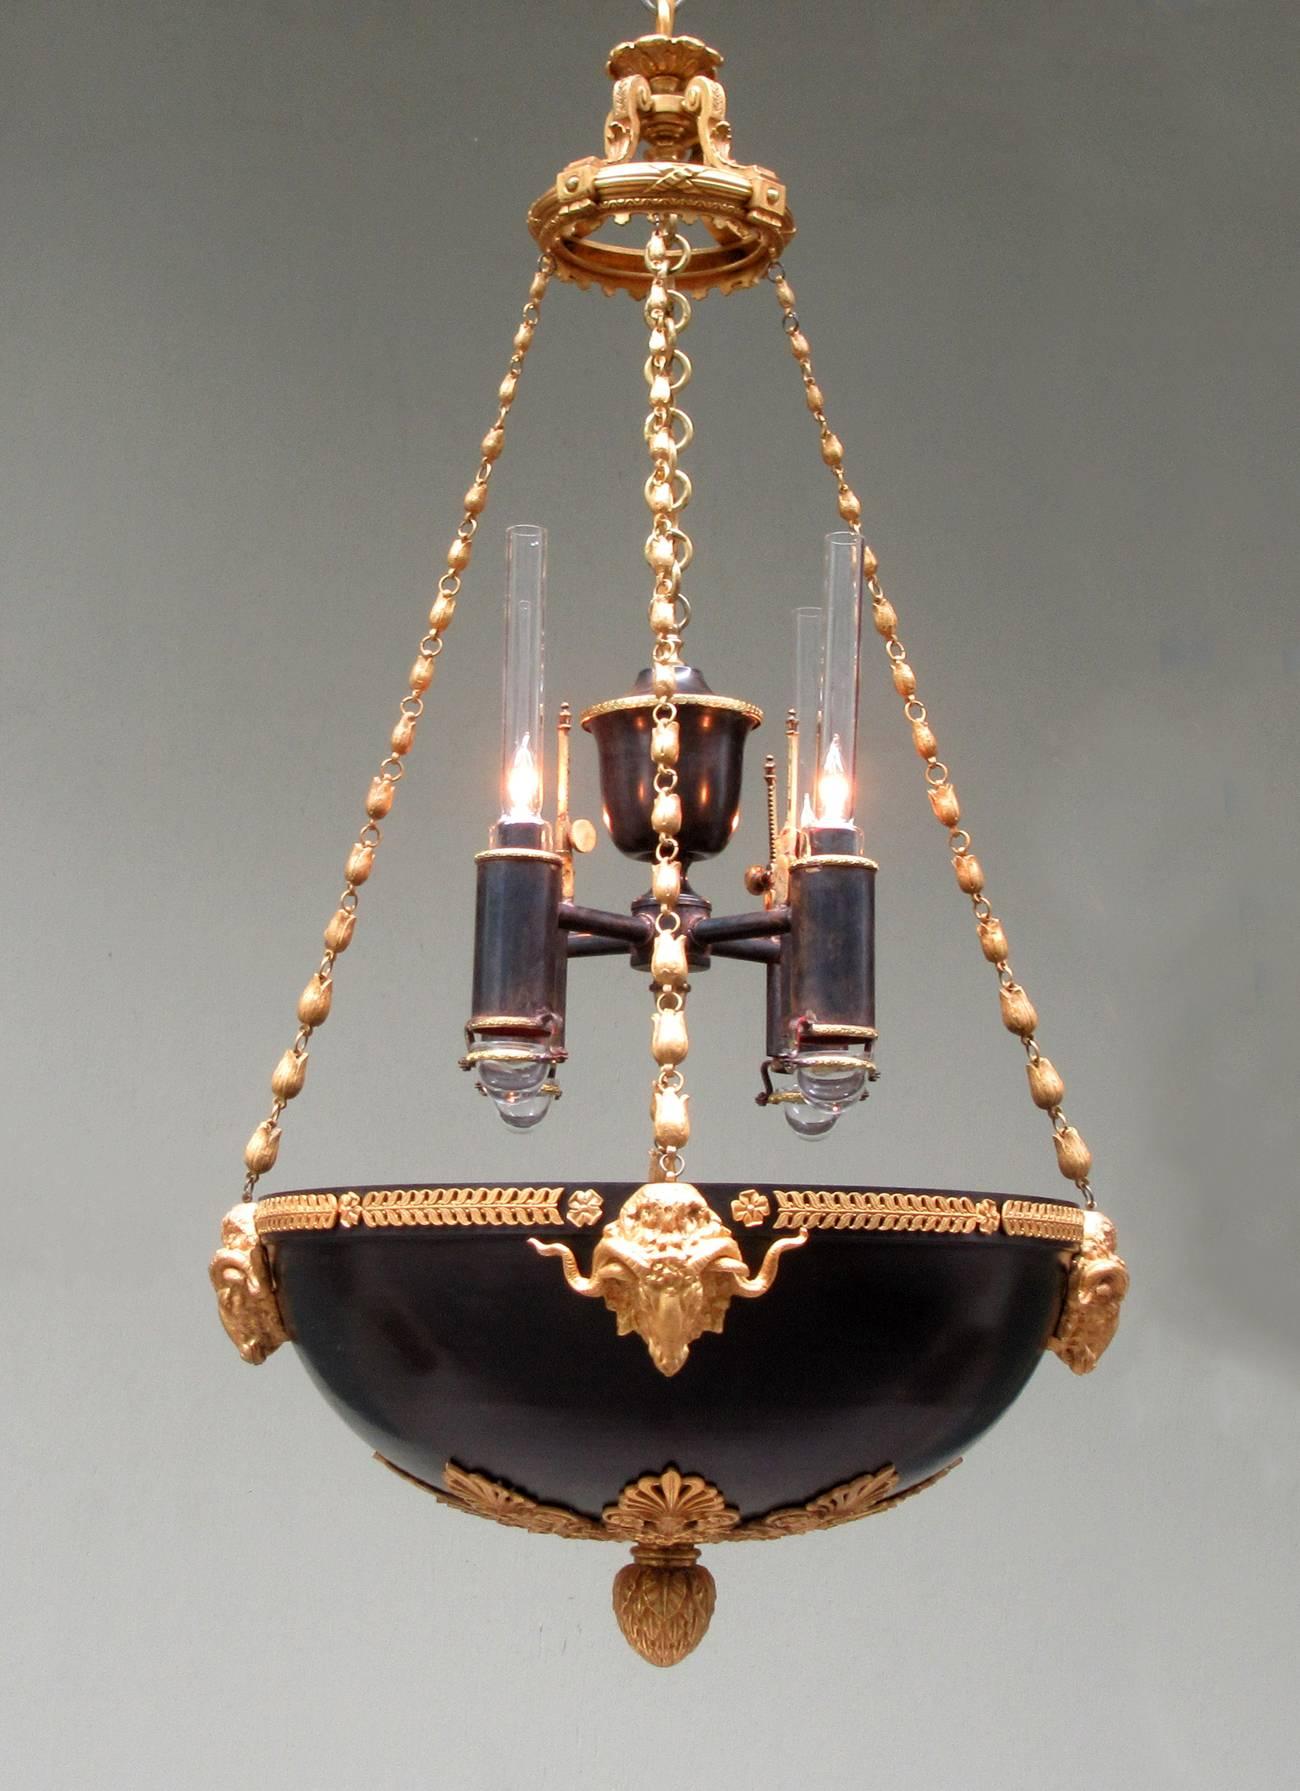 A pair of early 19th century English Regency patinated bronze and bronze doré Argand chandeliers, circa 1815, with elements of Thomas Hope such as tulip chains, anthemion and ram’s head motifs. The later added argand pendants, circa 1920, are made